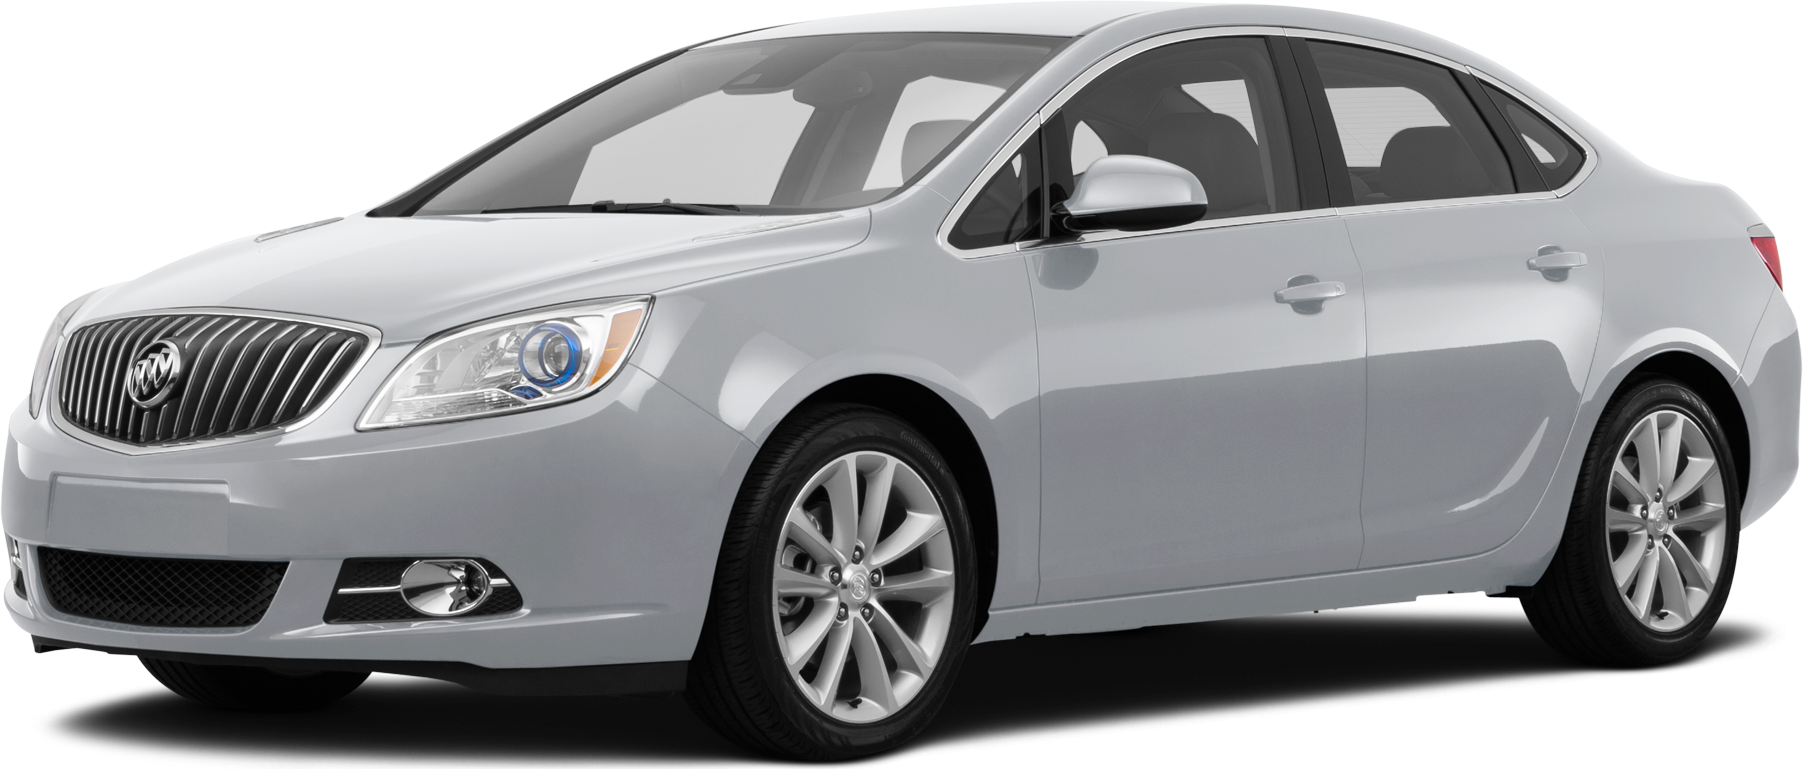 2015 Buick Values & for Sale | Kelley Blue Book